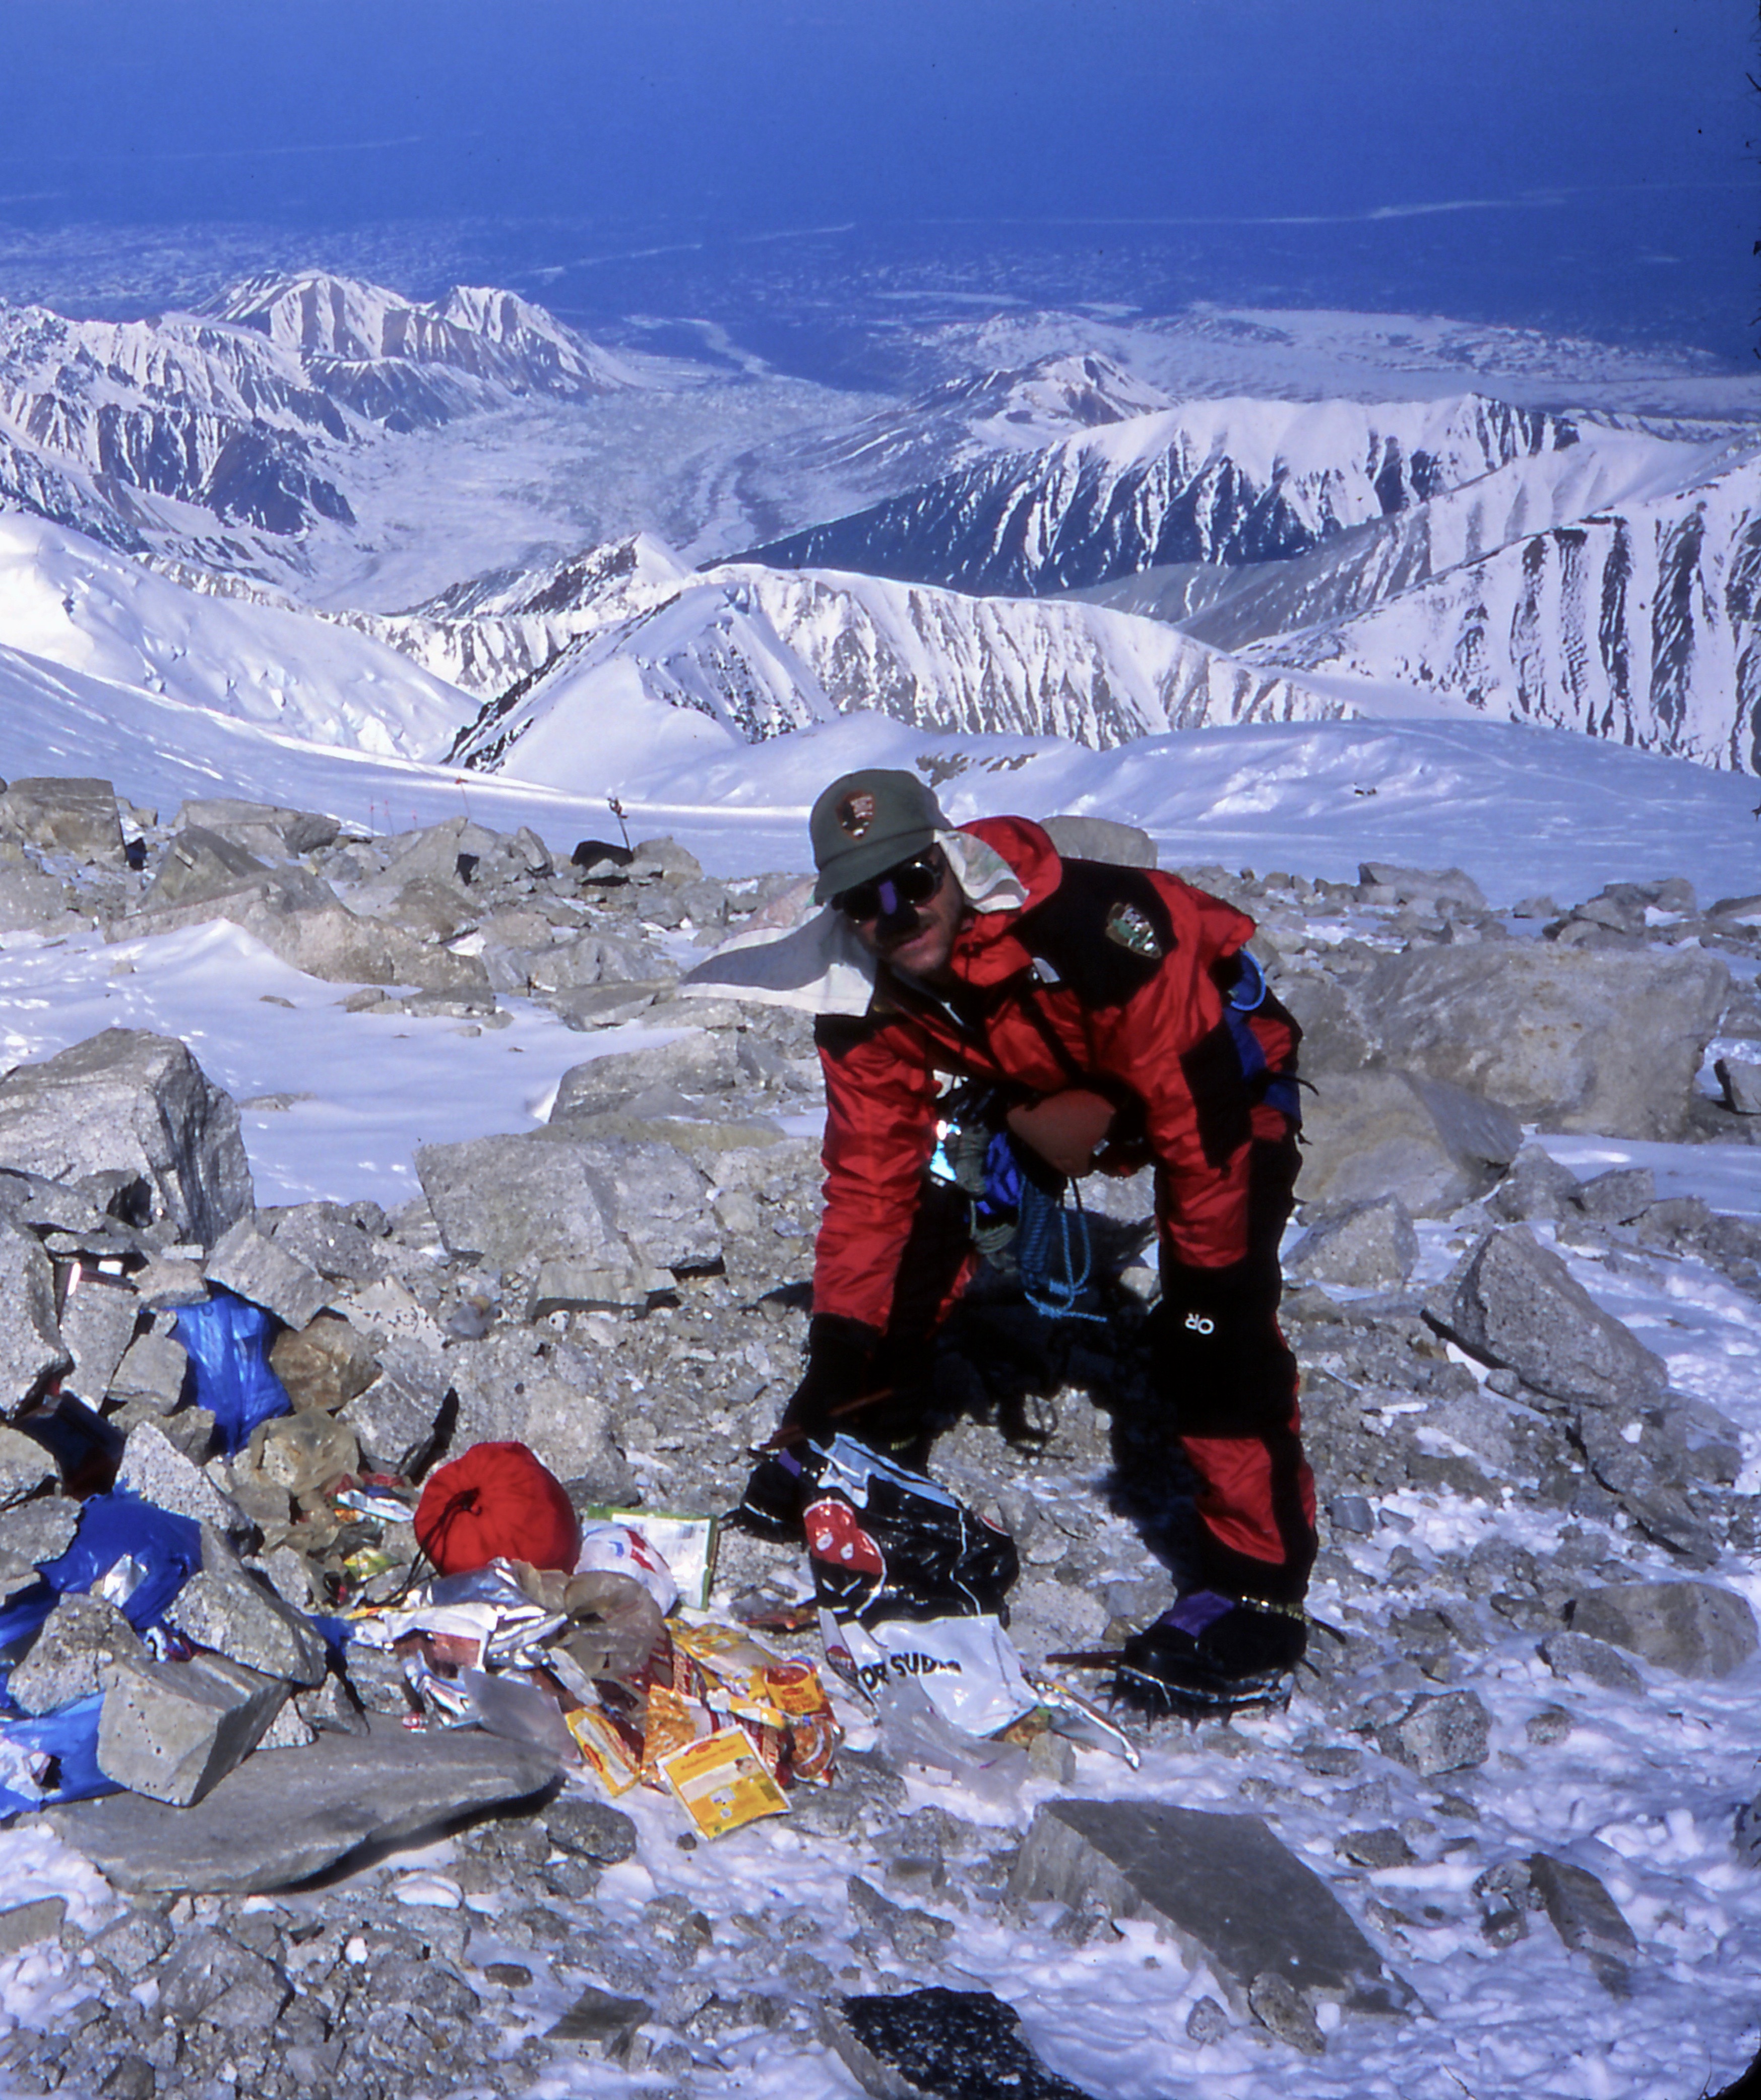 Ranger wearing crampons and mountaineering gear cleans up a pile of trash in a boulder zone on a snowy slope